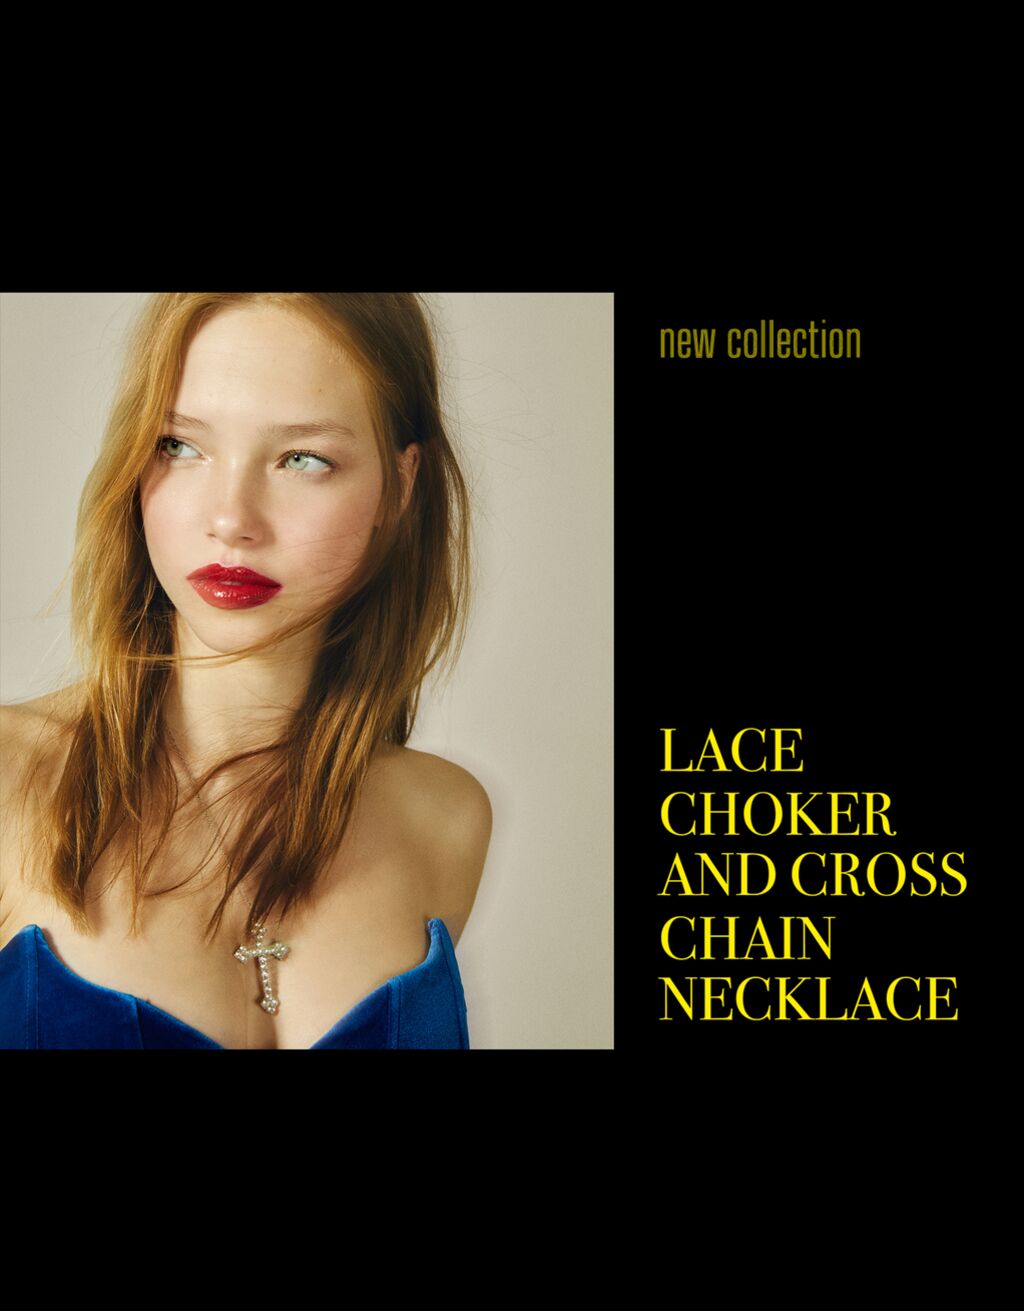 Set of 2 lace choker and cross chain necklaces